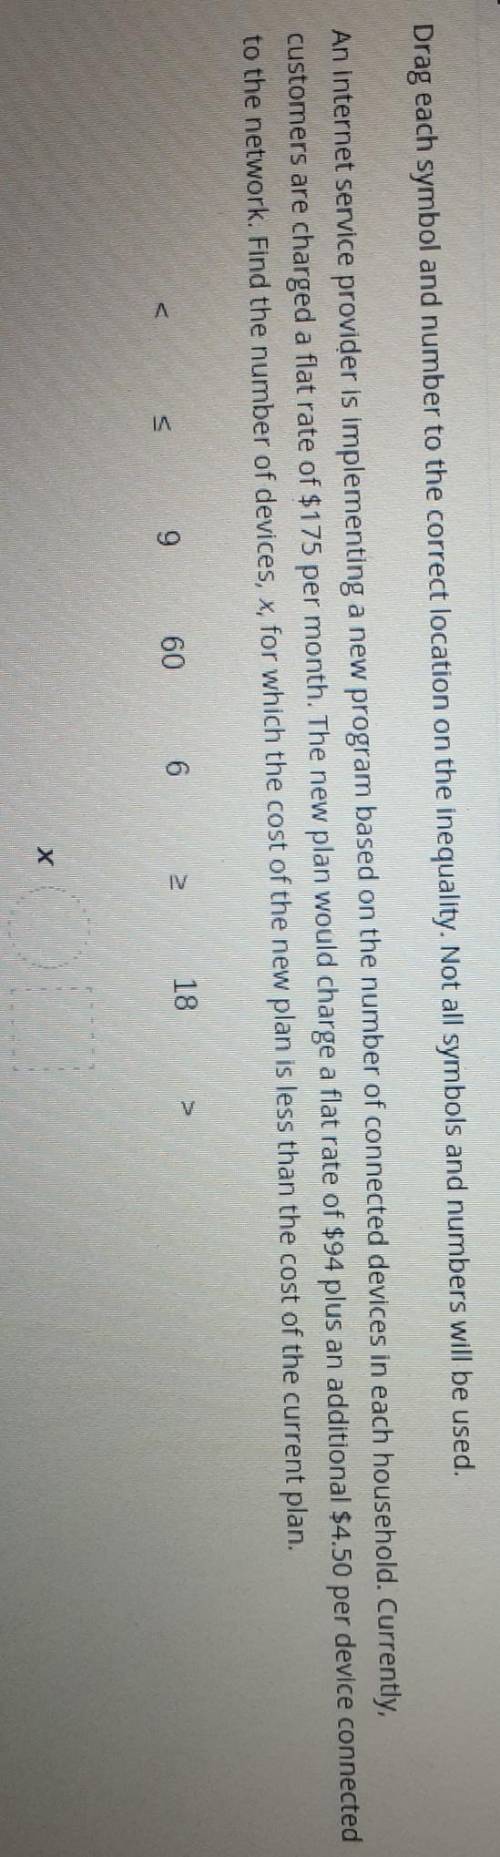 I need help with this plzz:(